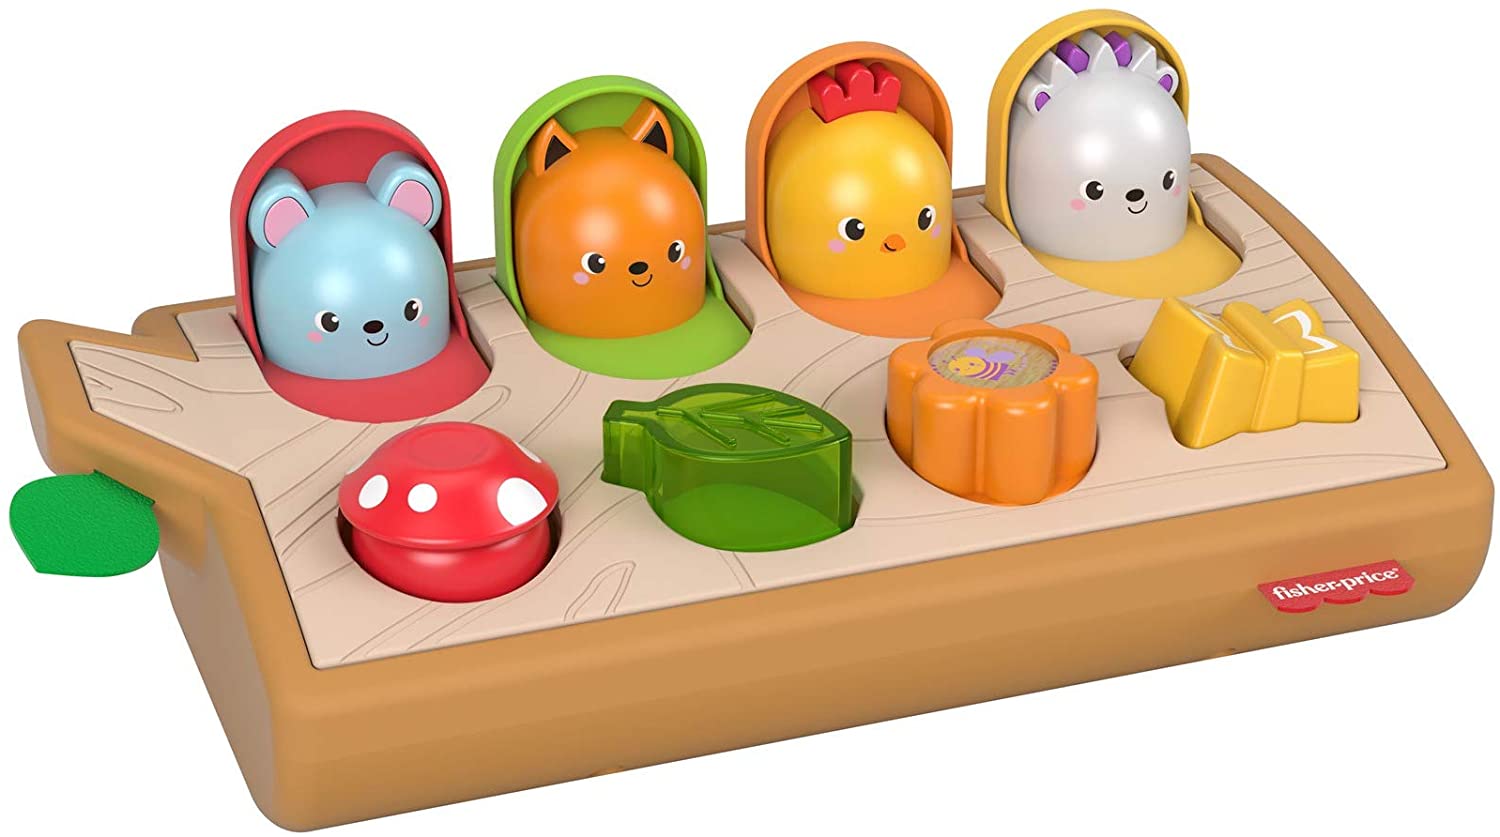 Fisher Price GJW24 - Peep-Look Toy, Promotes Fine Motor Skills, Made of Wood and Soft Materials, Activity Toy for Babies from 9 Months